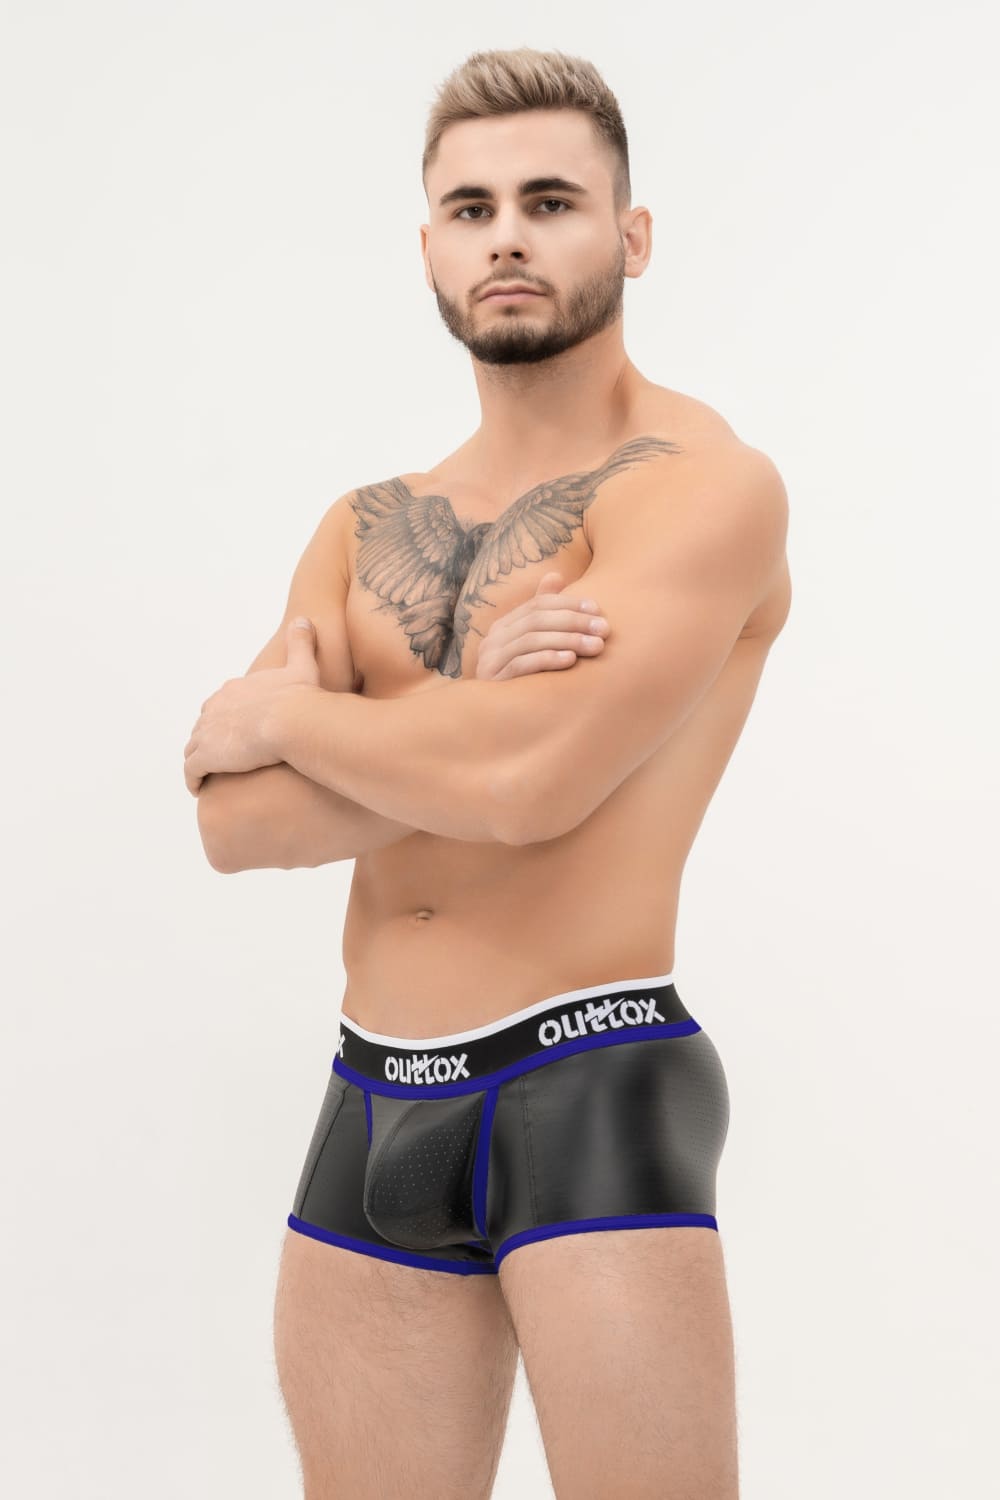 Outtox. Open Rear Trunk Shorts with Snap Codpiece. Black+Blue 'Royal'